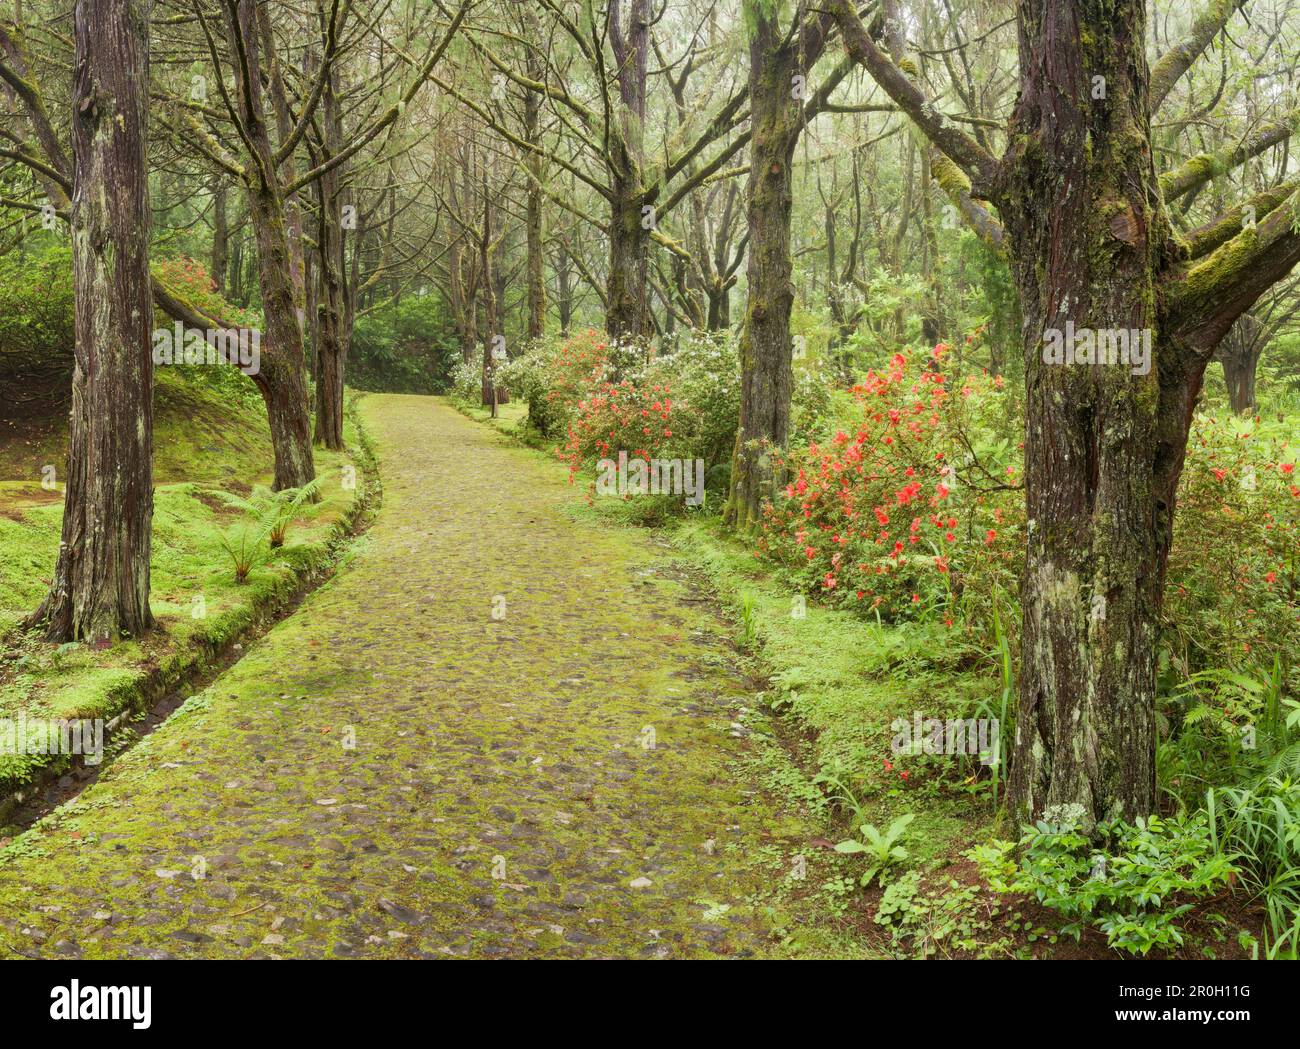 Mossy way in the forest, Caldeirao Verde, Queimadas Forest Park, Madeira, Portugal Stock Photo